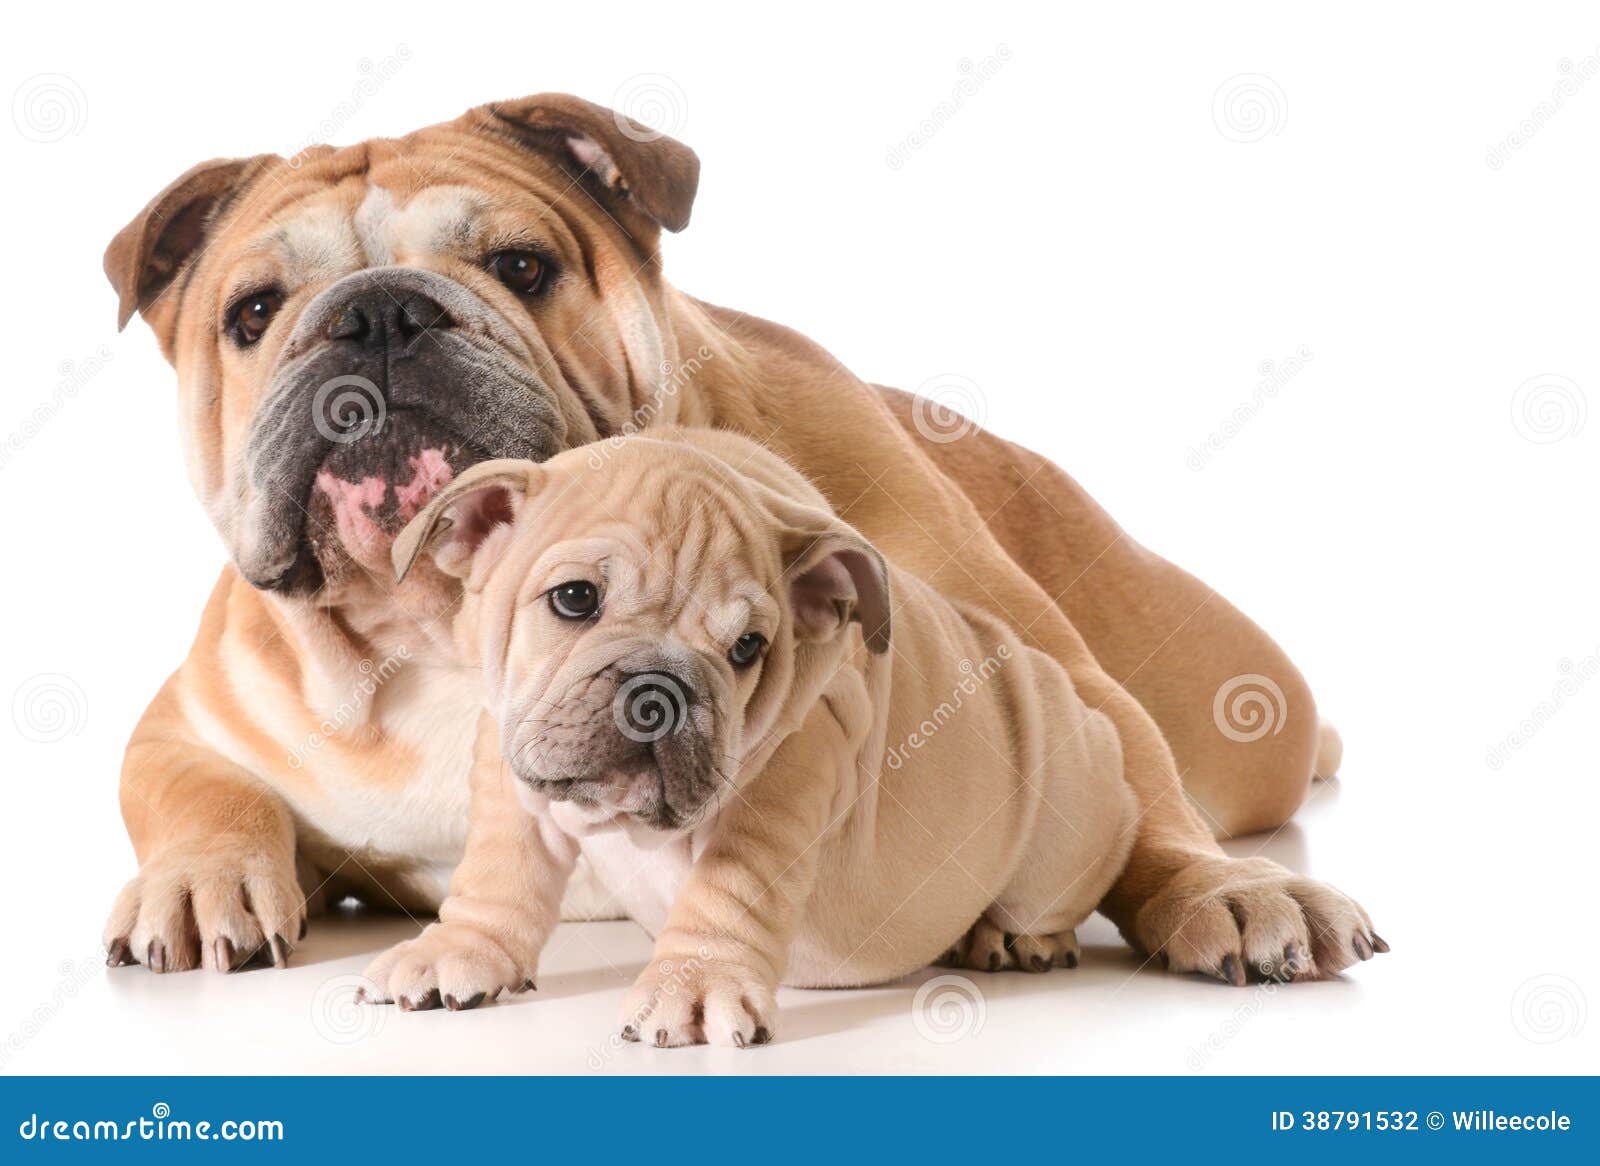 Father and son dogs stock photo. Image of indoors, charming - 38791532